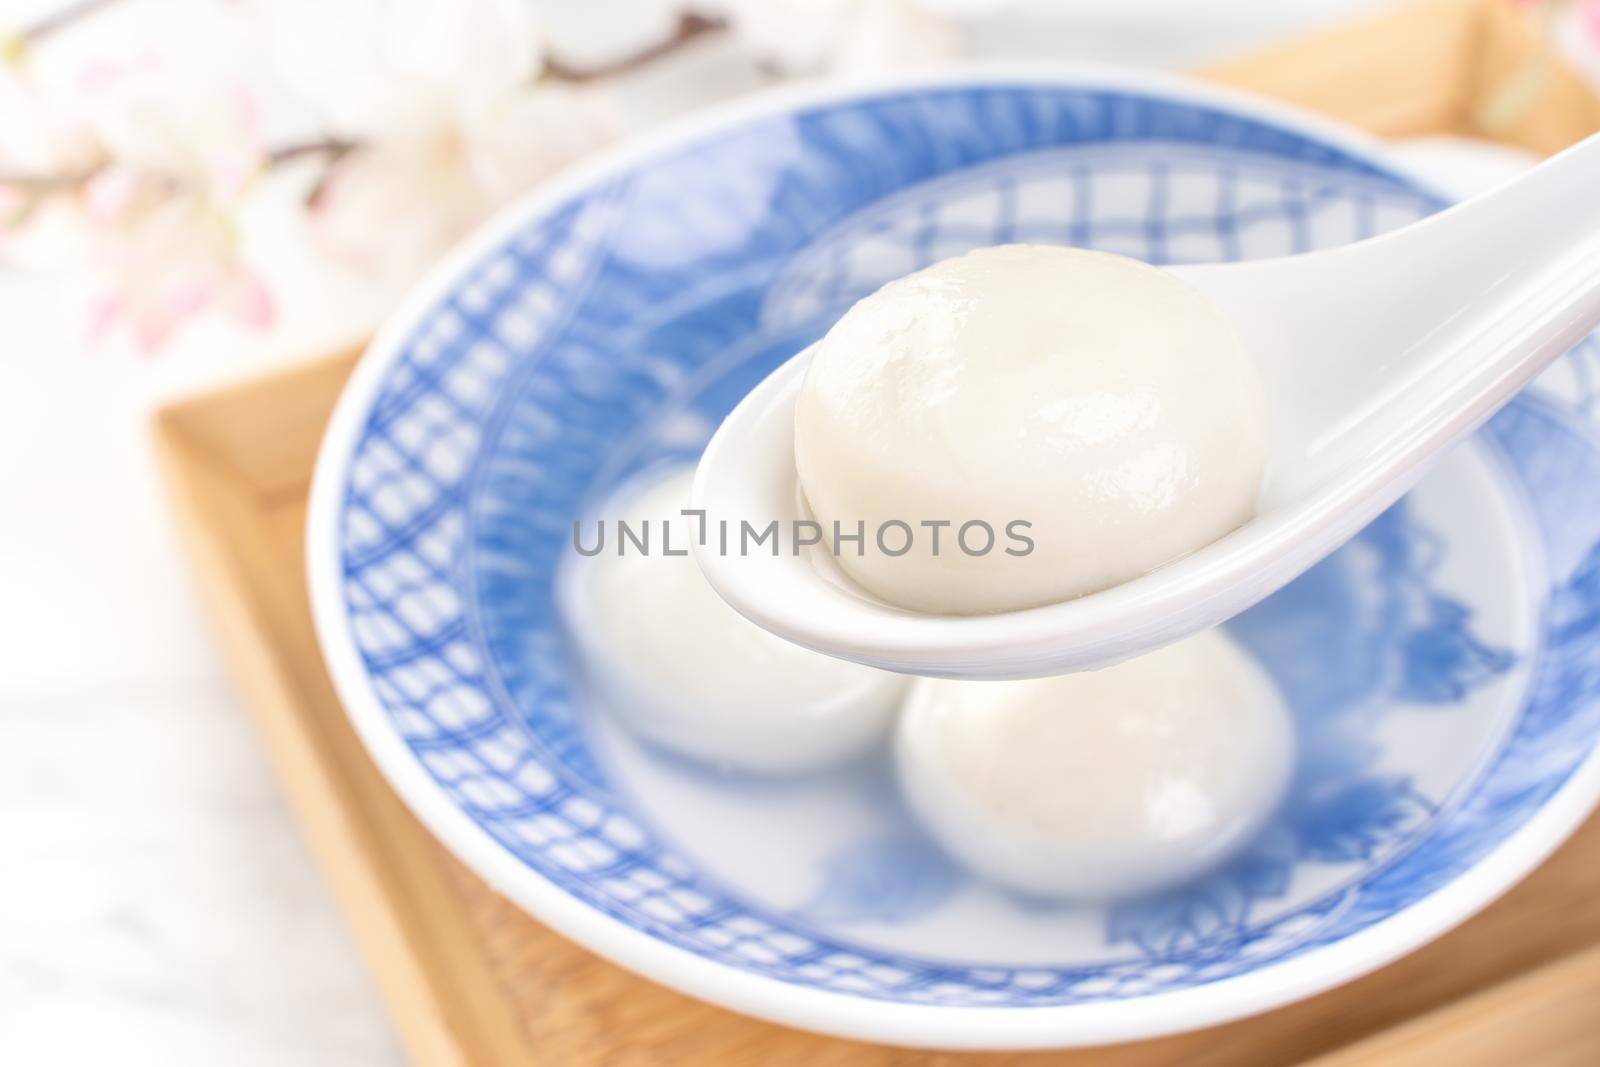 Delicious tang yuan, yuanxiao in a small bowl. Asian traditional festive food rice dumplings ball with stuffed fillings for Chinese Lantern Festival, close up.